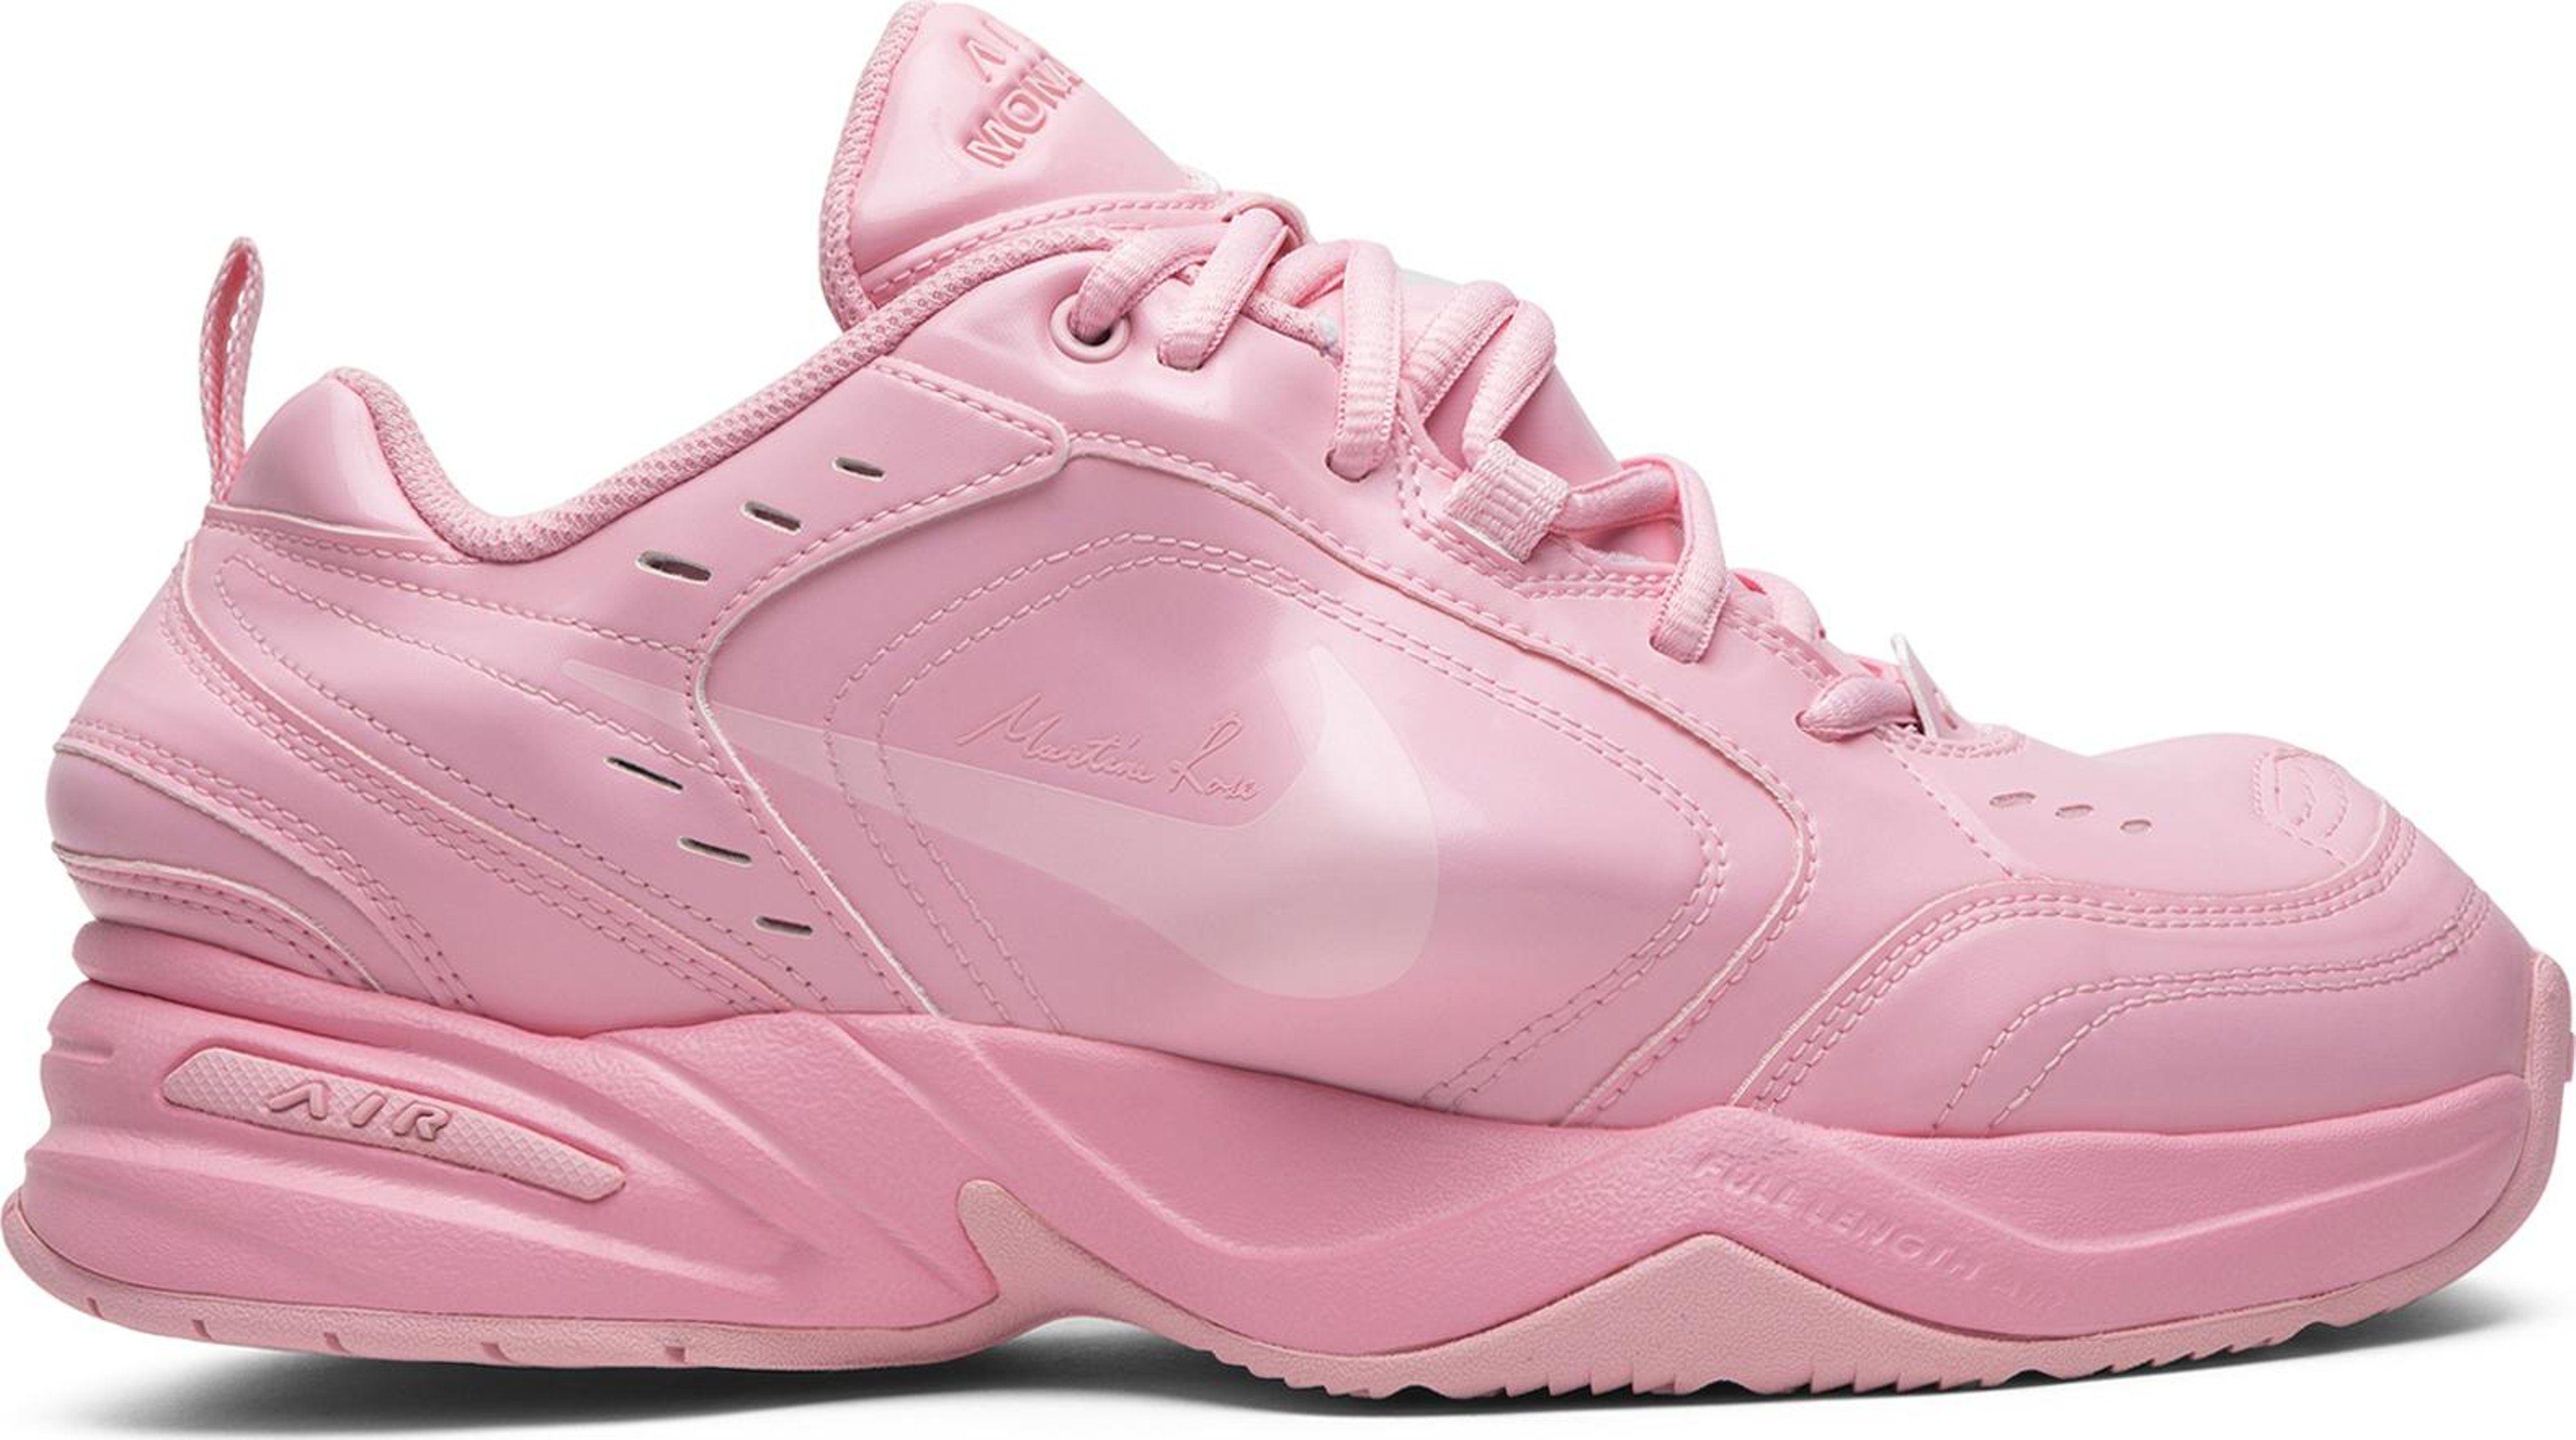 Buy Martine Rose x Air Monarch IV 'Soft Pink' - AT3147 600 - Pink | GOAT